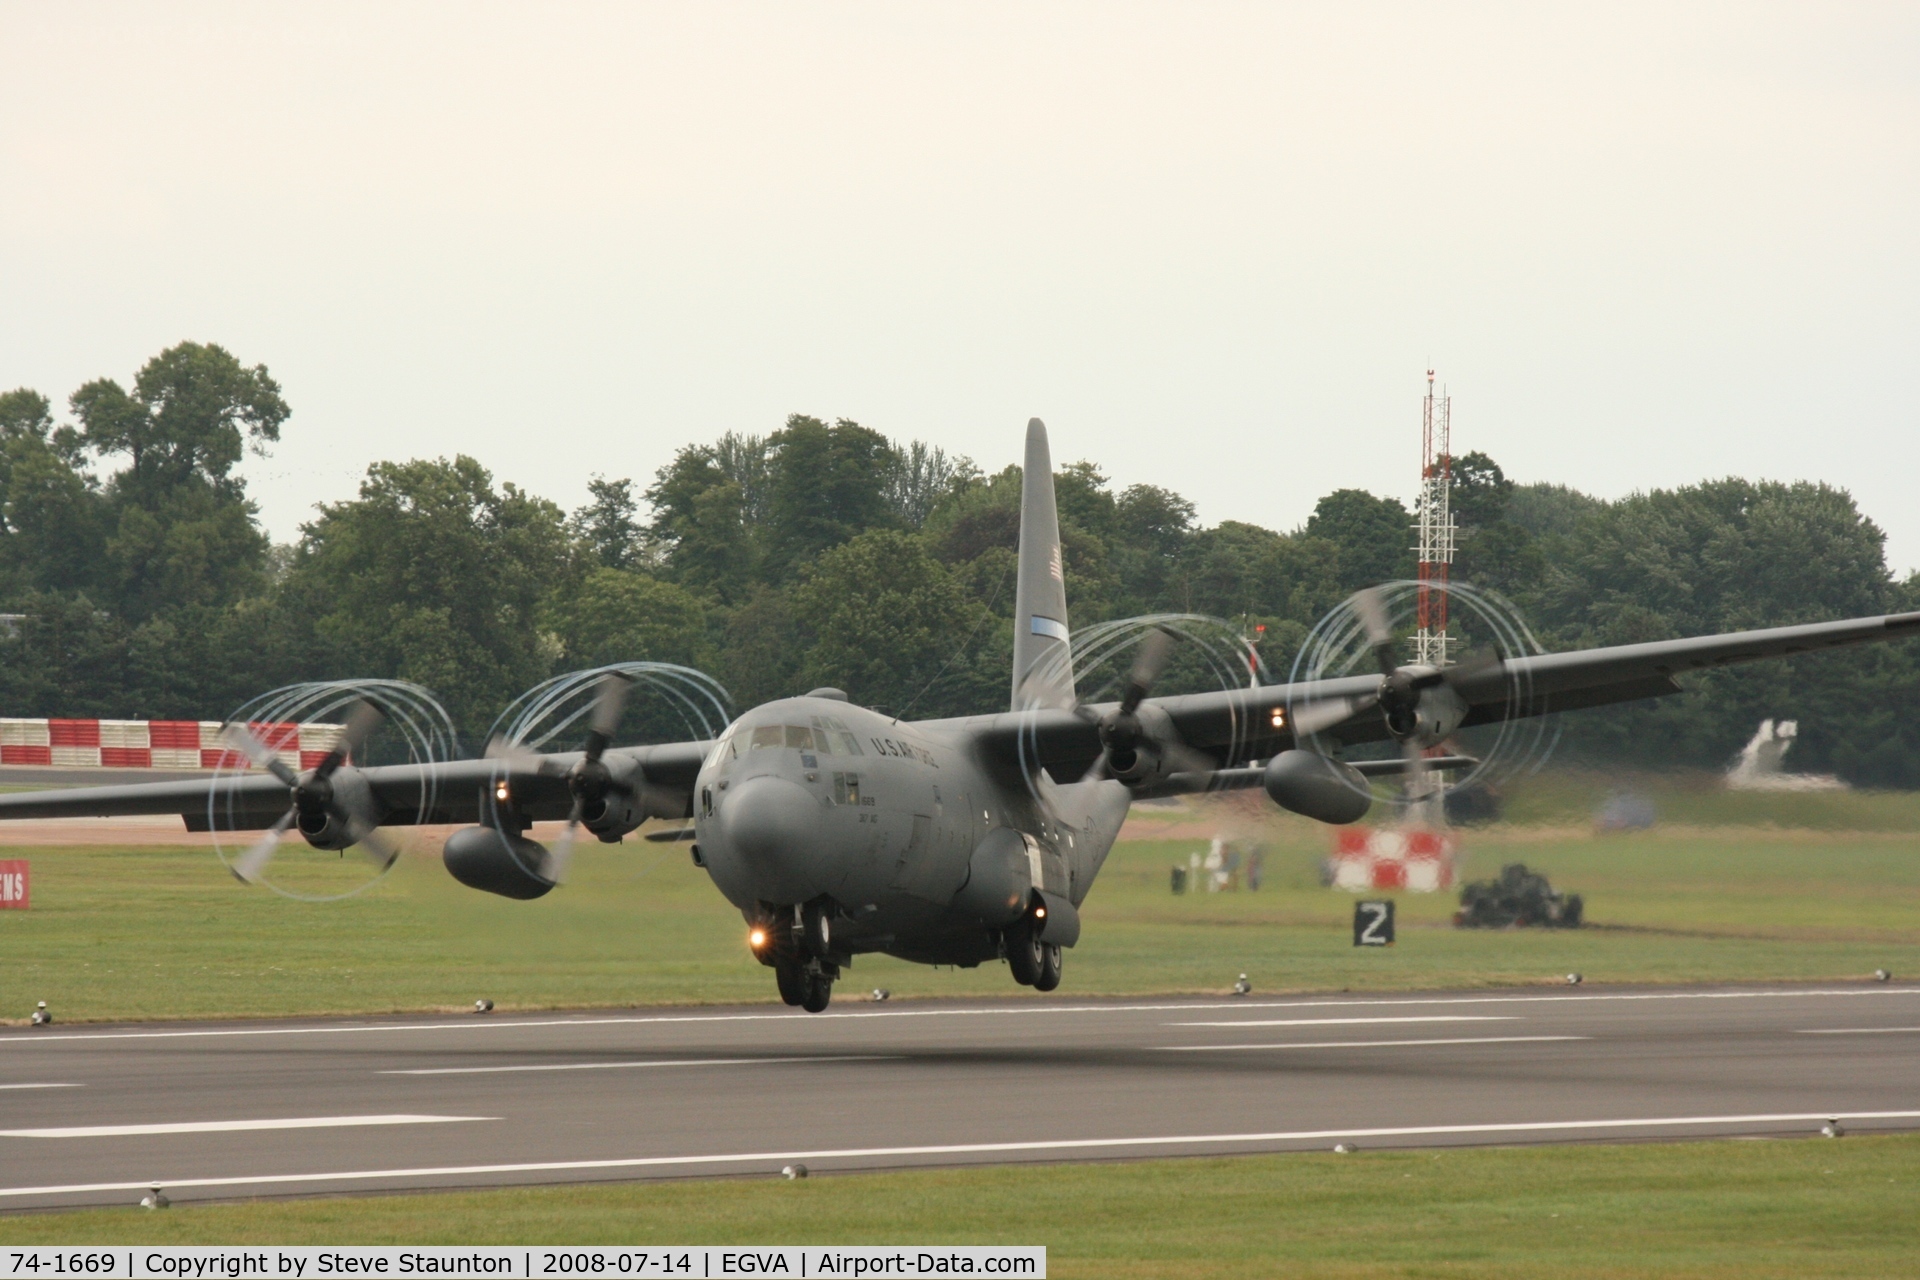 74-1669, 1974 Lockheed C-130H Hercules C/N 382-4617, Taken at the Royal International Air Tattoo 2008 during arrivals and departures (show days cancelled due to bad weather)